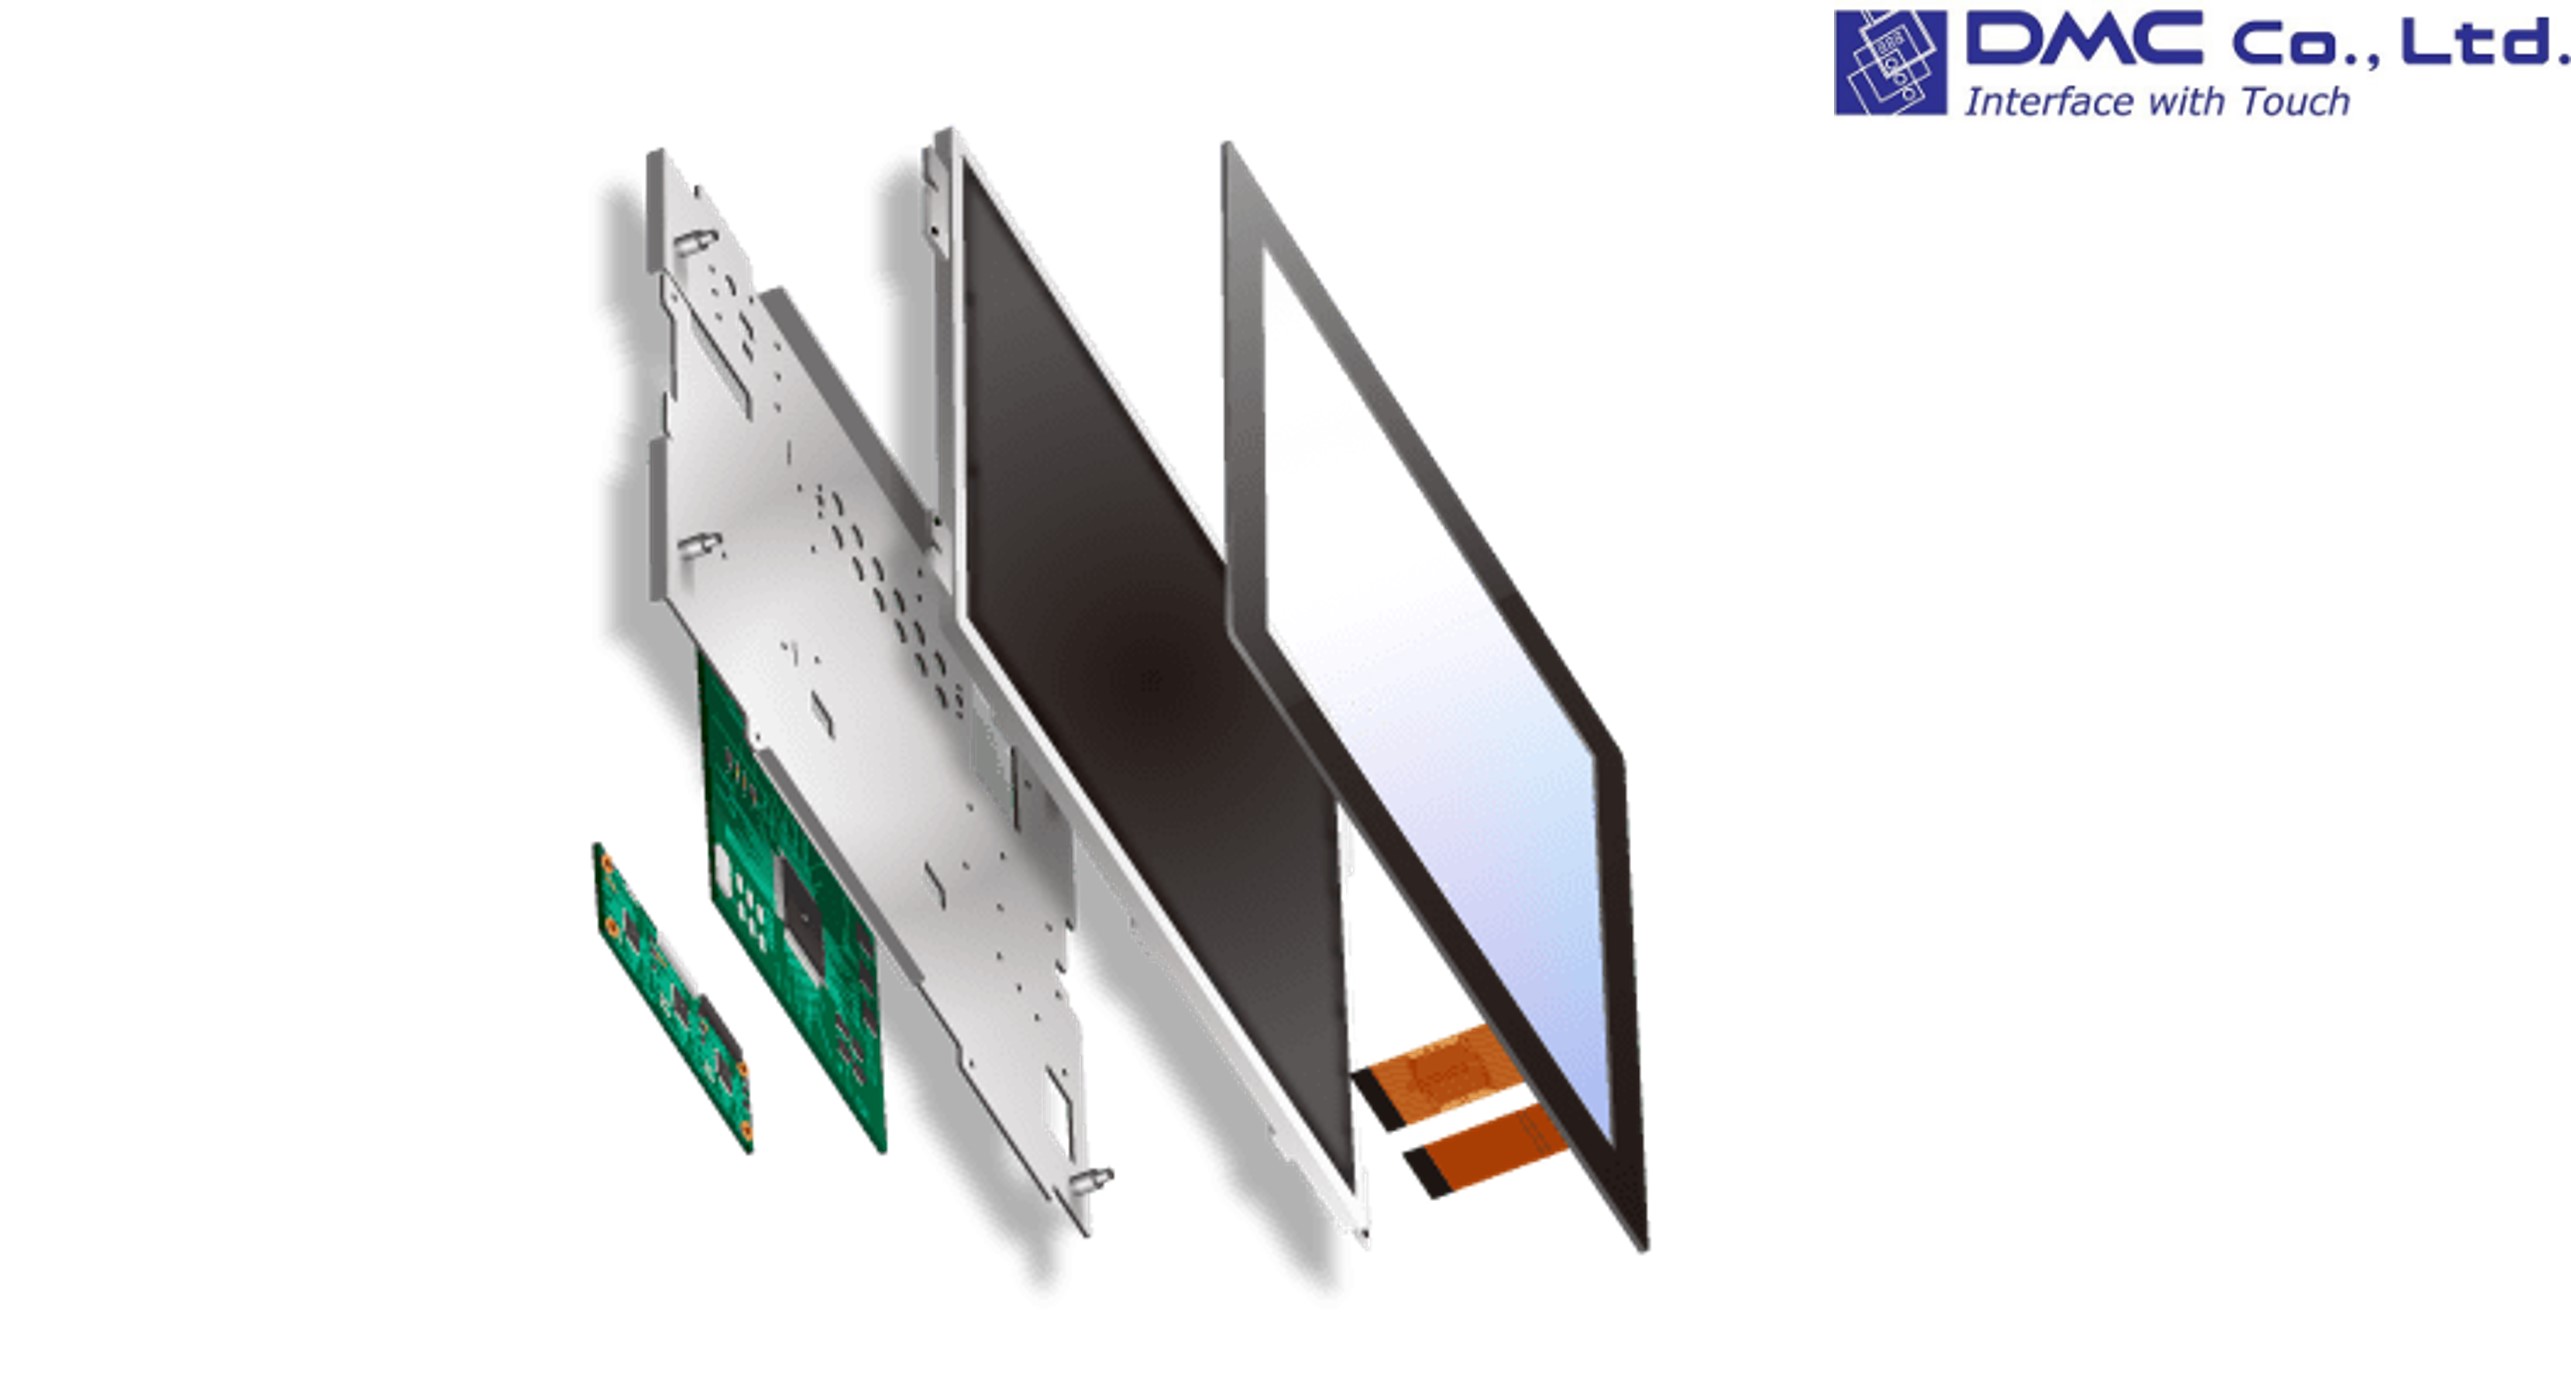 Tailor-Made touchscreen LCD modules by DMC